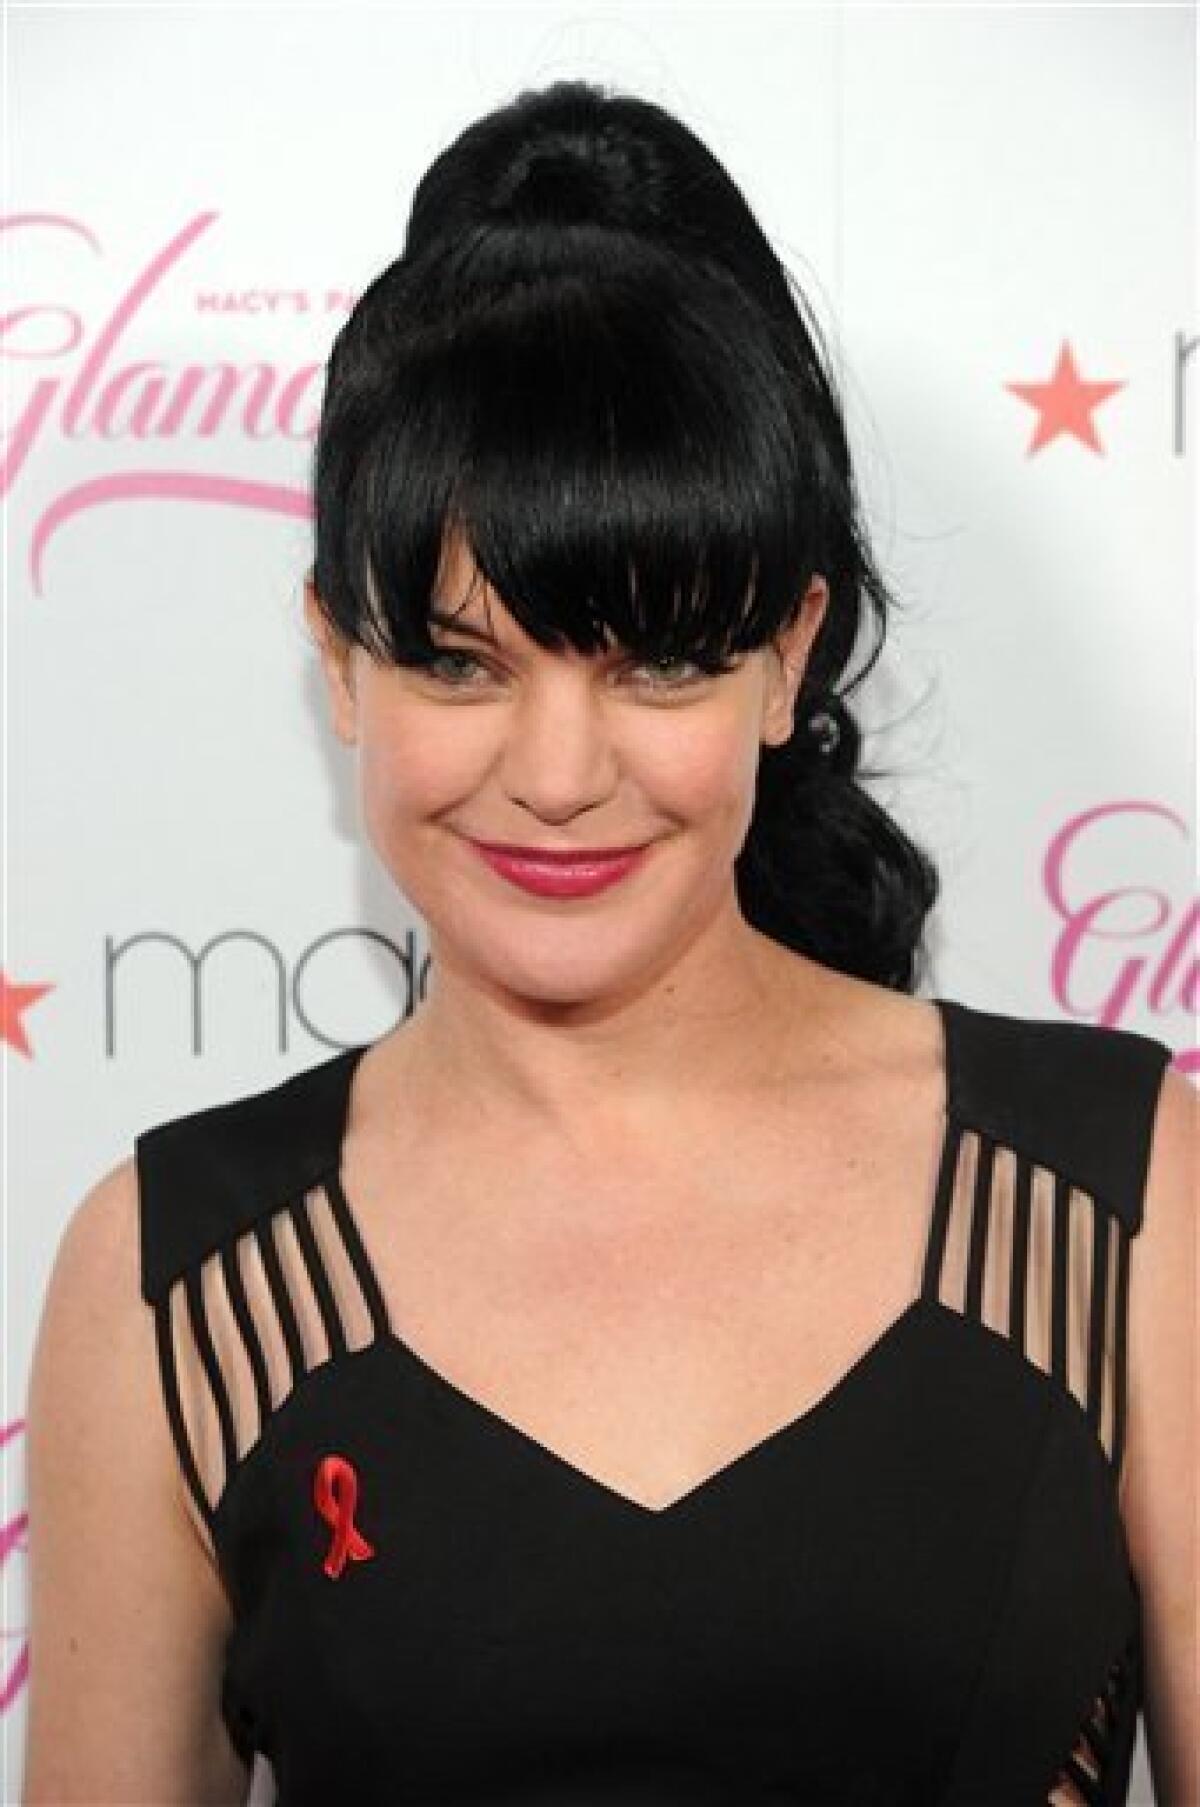 FILE - In this Sept. 23, 2011 file photo, actress Pauley Perrette arrives at the 2011 Macy’s Passport Presents Glamorama at the Orpheum Theatre in Los Angeles, Calif. Perrette portrays Abby Sciuto, the Goth lab rat on CBS' crime procedural, "NCIS." In its ninth season, "NCIS" remains a smash hit, averaging 20 million viewers a week. (AP Photo/Kristian Dowling, file)